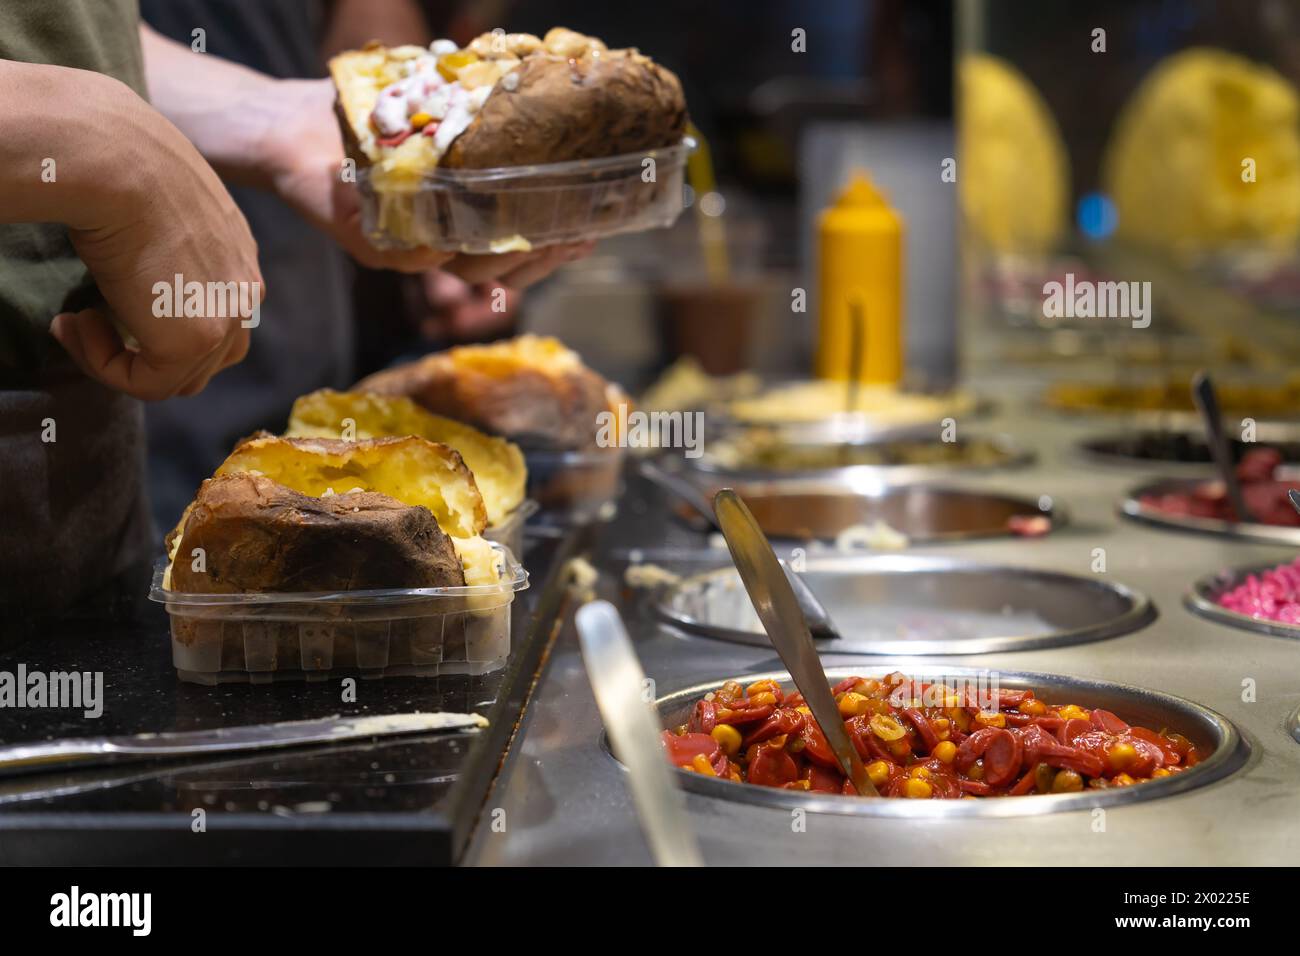 Turkish street food Kumpir. Male cook adds different fillings to the Kumpir. Delicious baked potatoes with a variety of mixed fillings Stock Photo